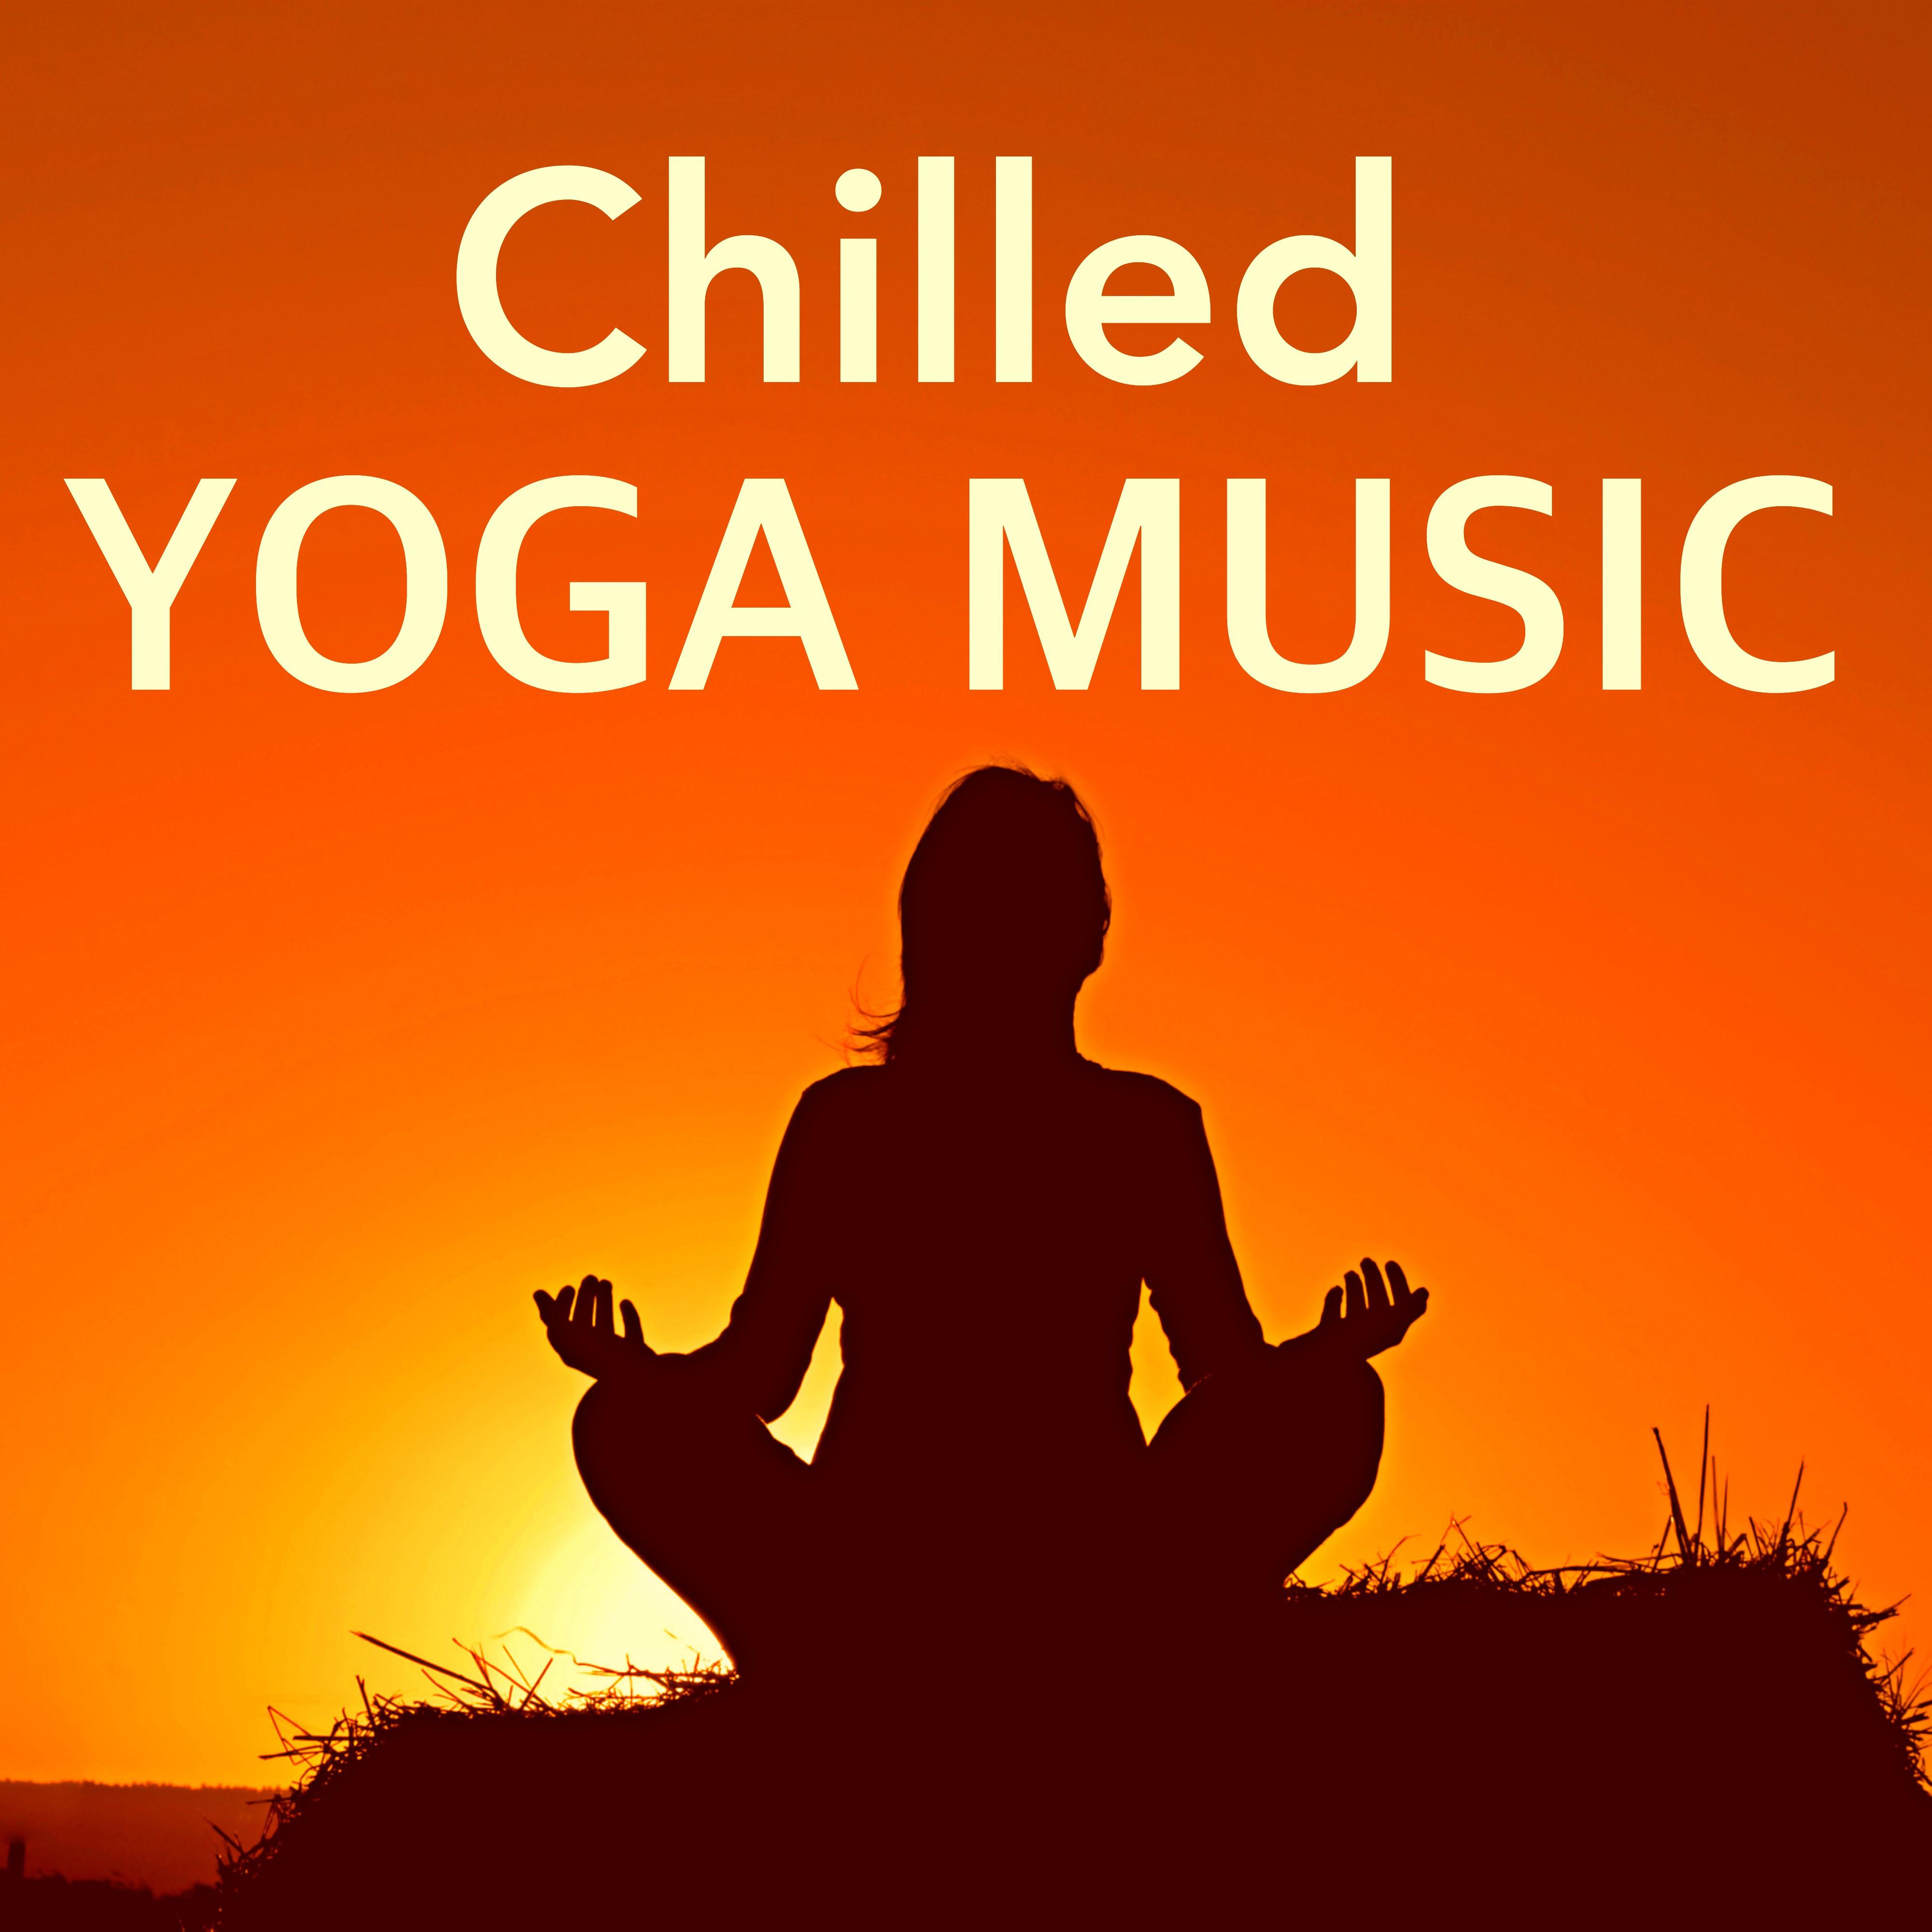 Chilled Yoga Music - Chilled Relaxing Music for Deep Concengtration, Meditation and Memory Improve, Sound Healing Therapy